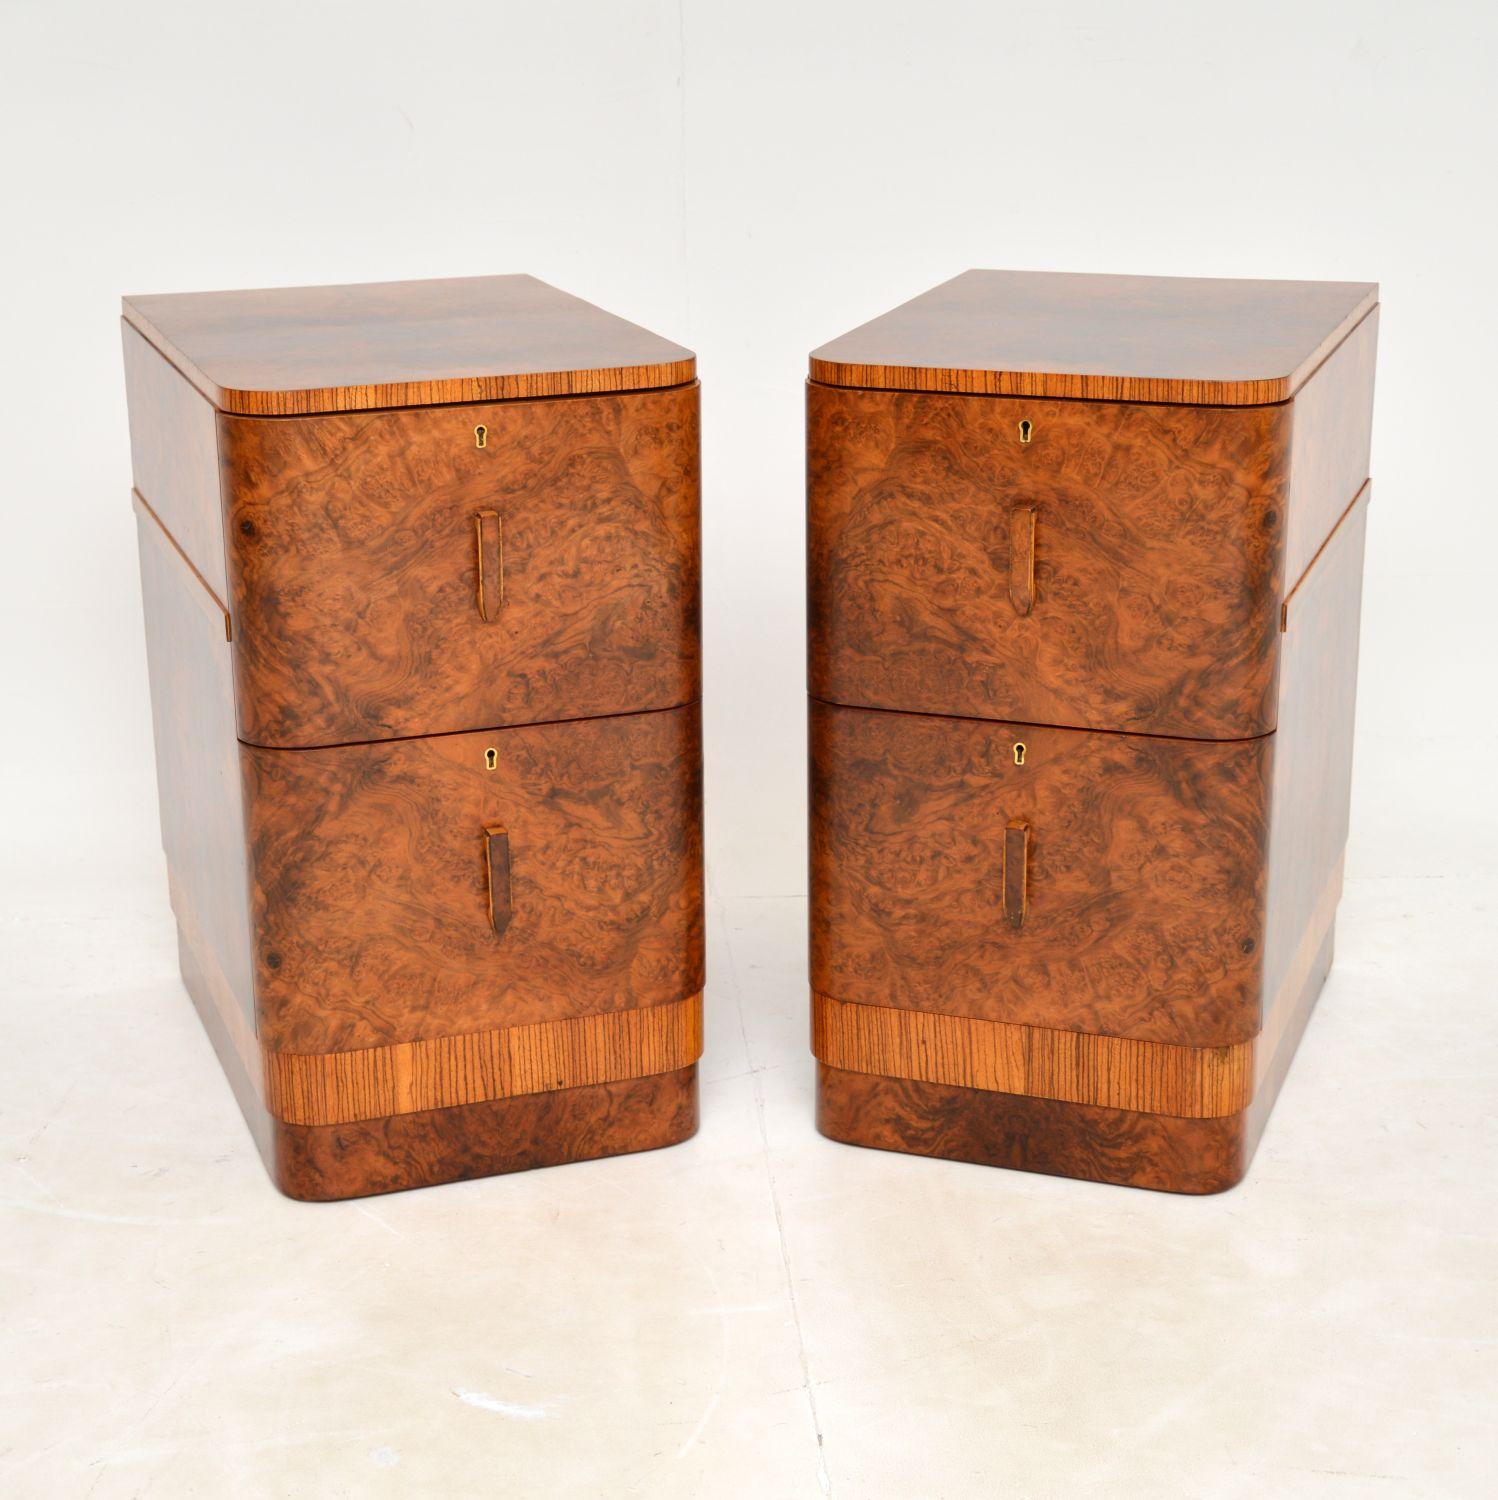 A beautiful pair of original Art Deco period bedside chests in Walnut. These were made in England, they date from the 1930’s.

They are of amazing quality, have a beautiful design and are a very useful size with lots of storage space. The drawer